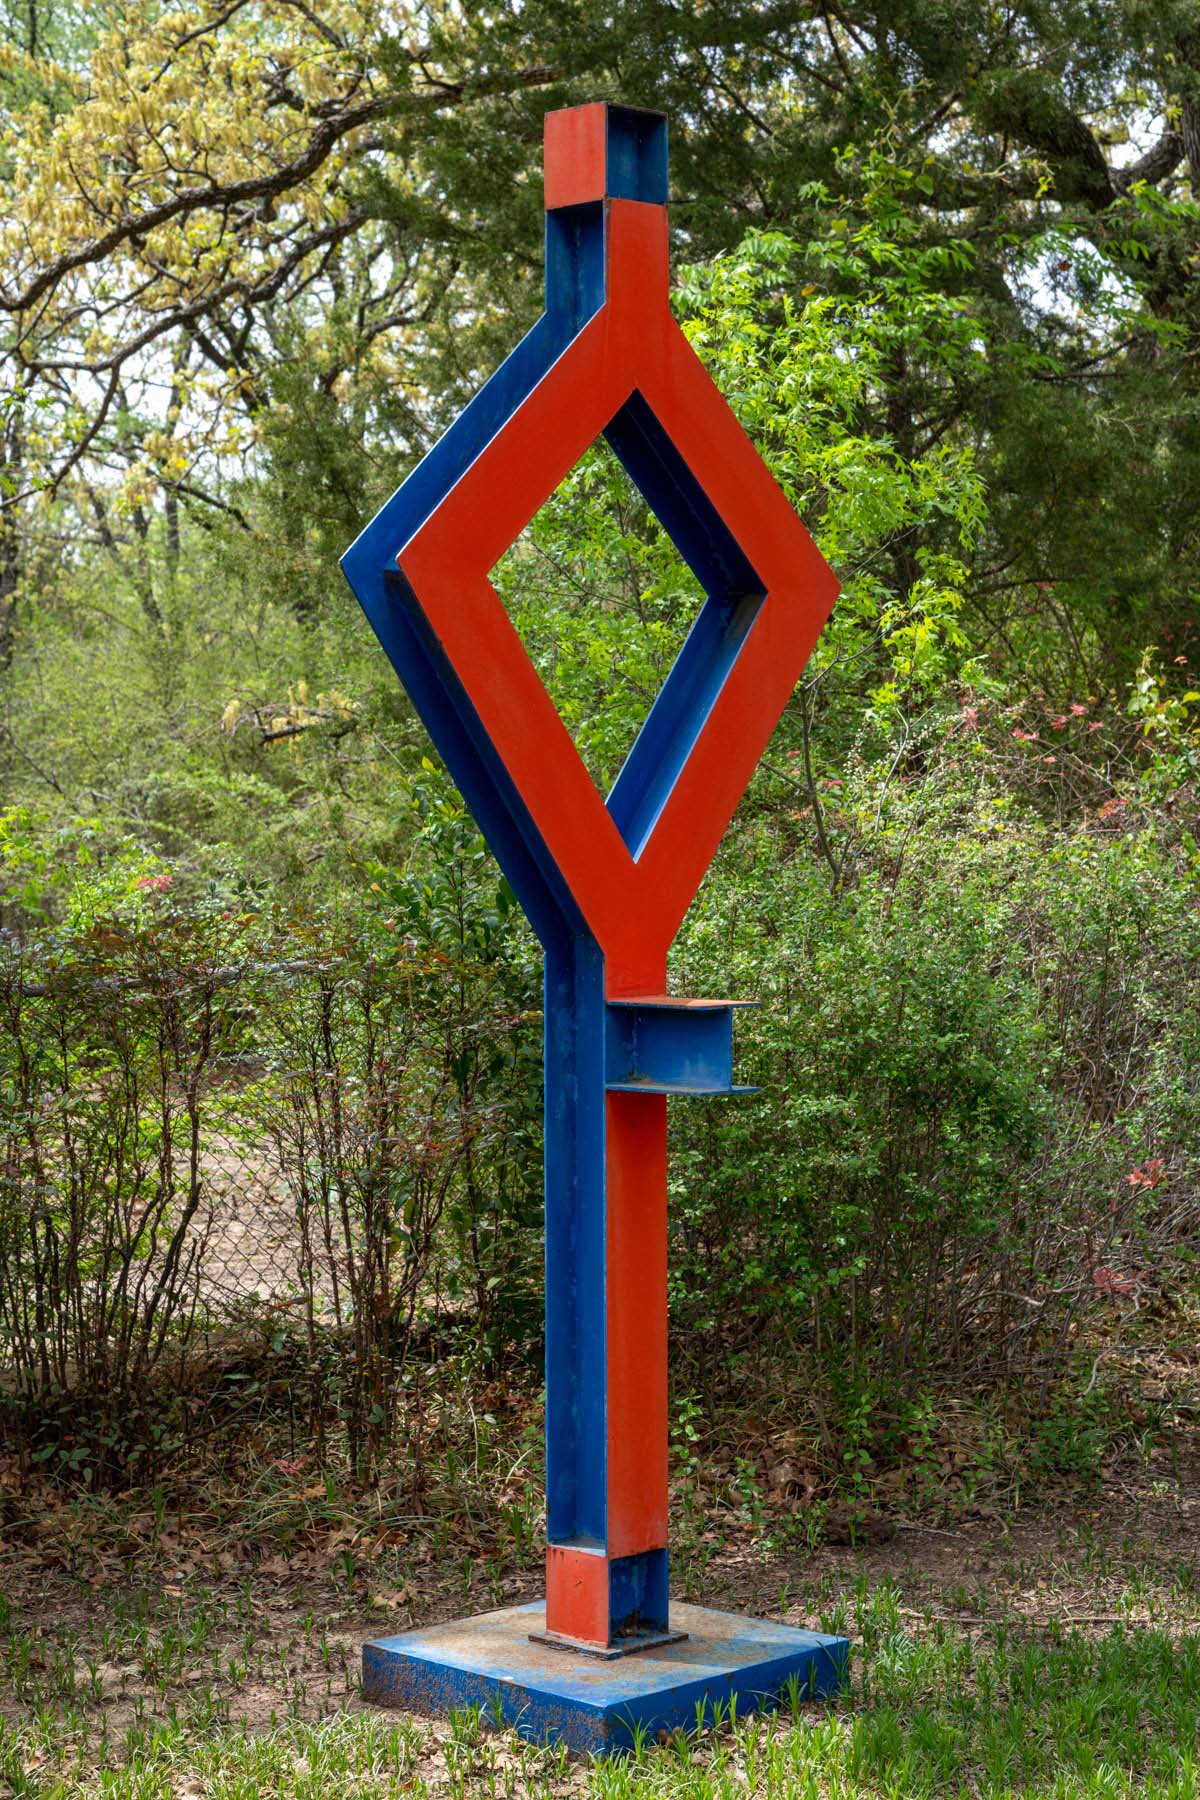 Red and blue outdoor sculpture made of steel beams with a diamond shape in the middle.